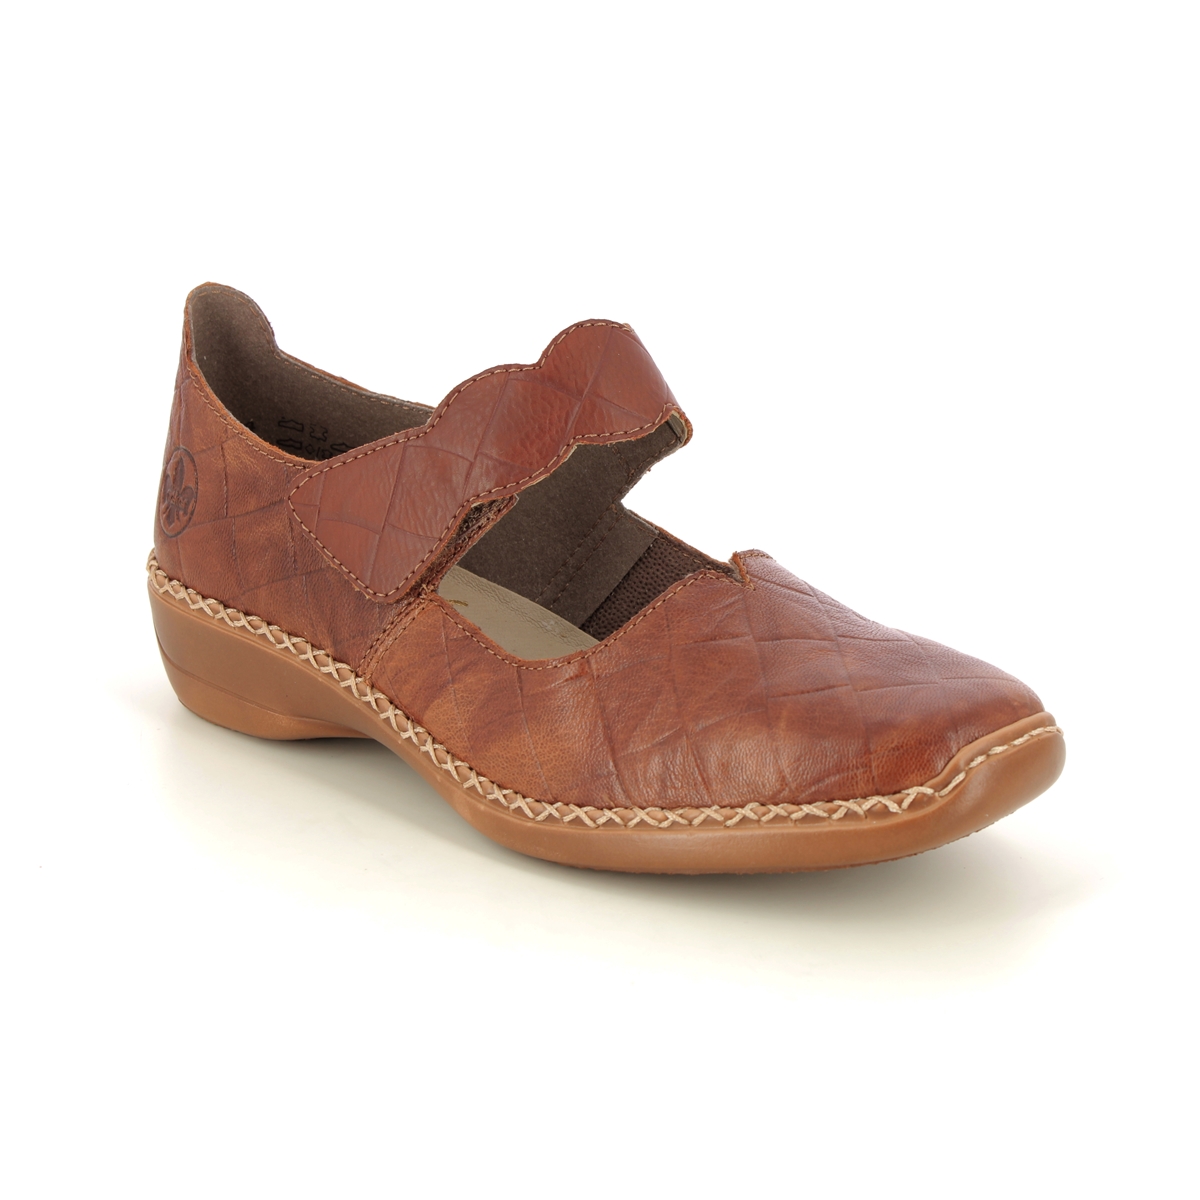 Rieker Dorisbar Tan Leather Womens Mary Jane Shoes 41398-22 In Size 37 In Plain Tan Leather